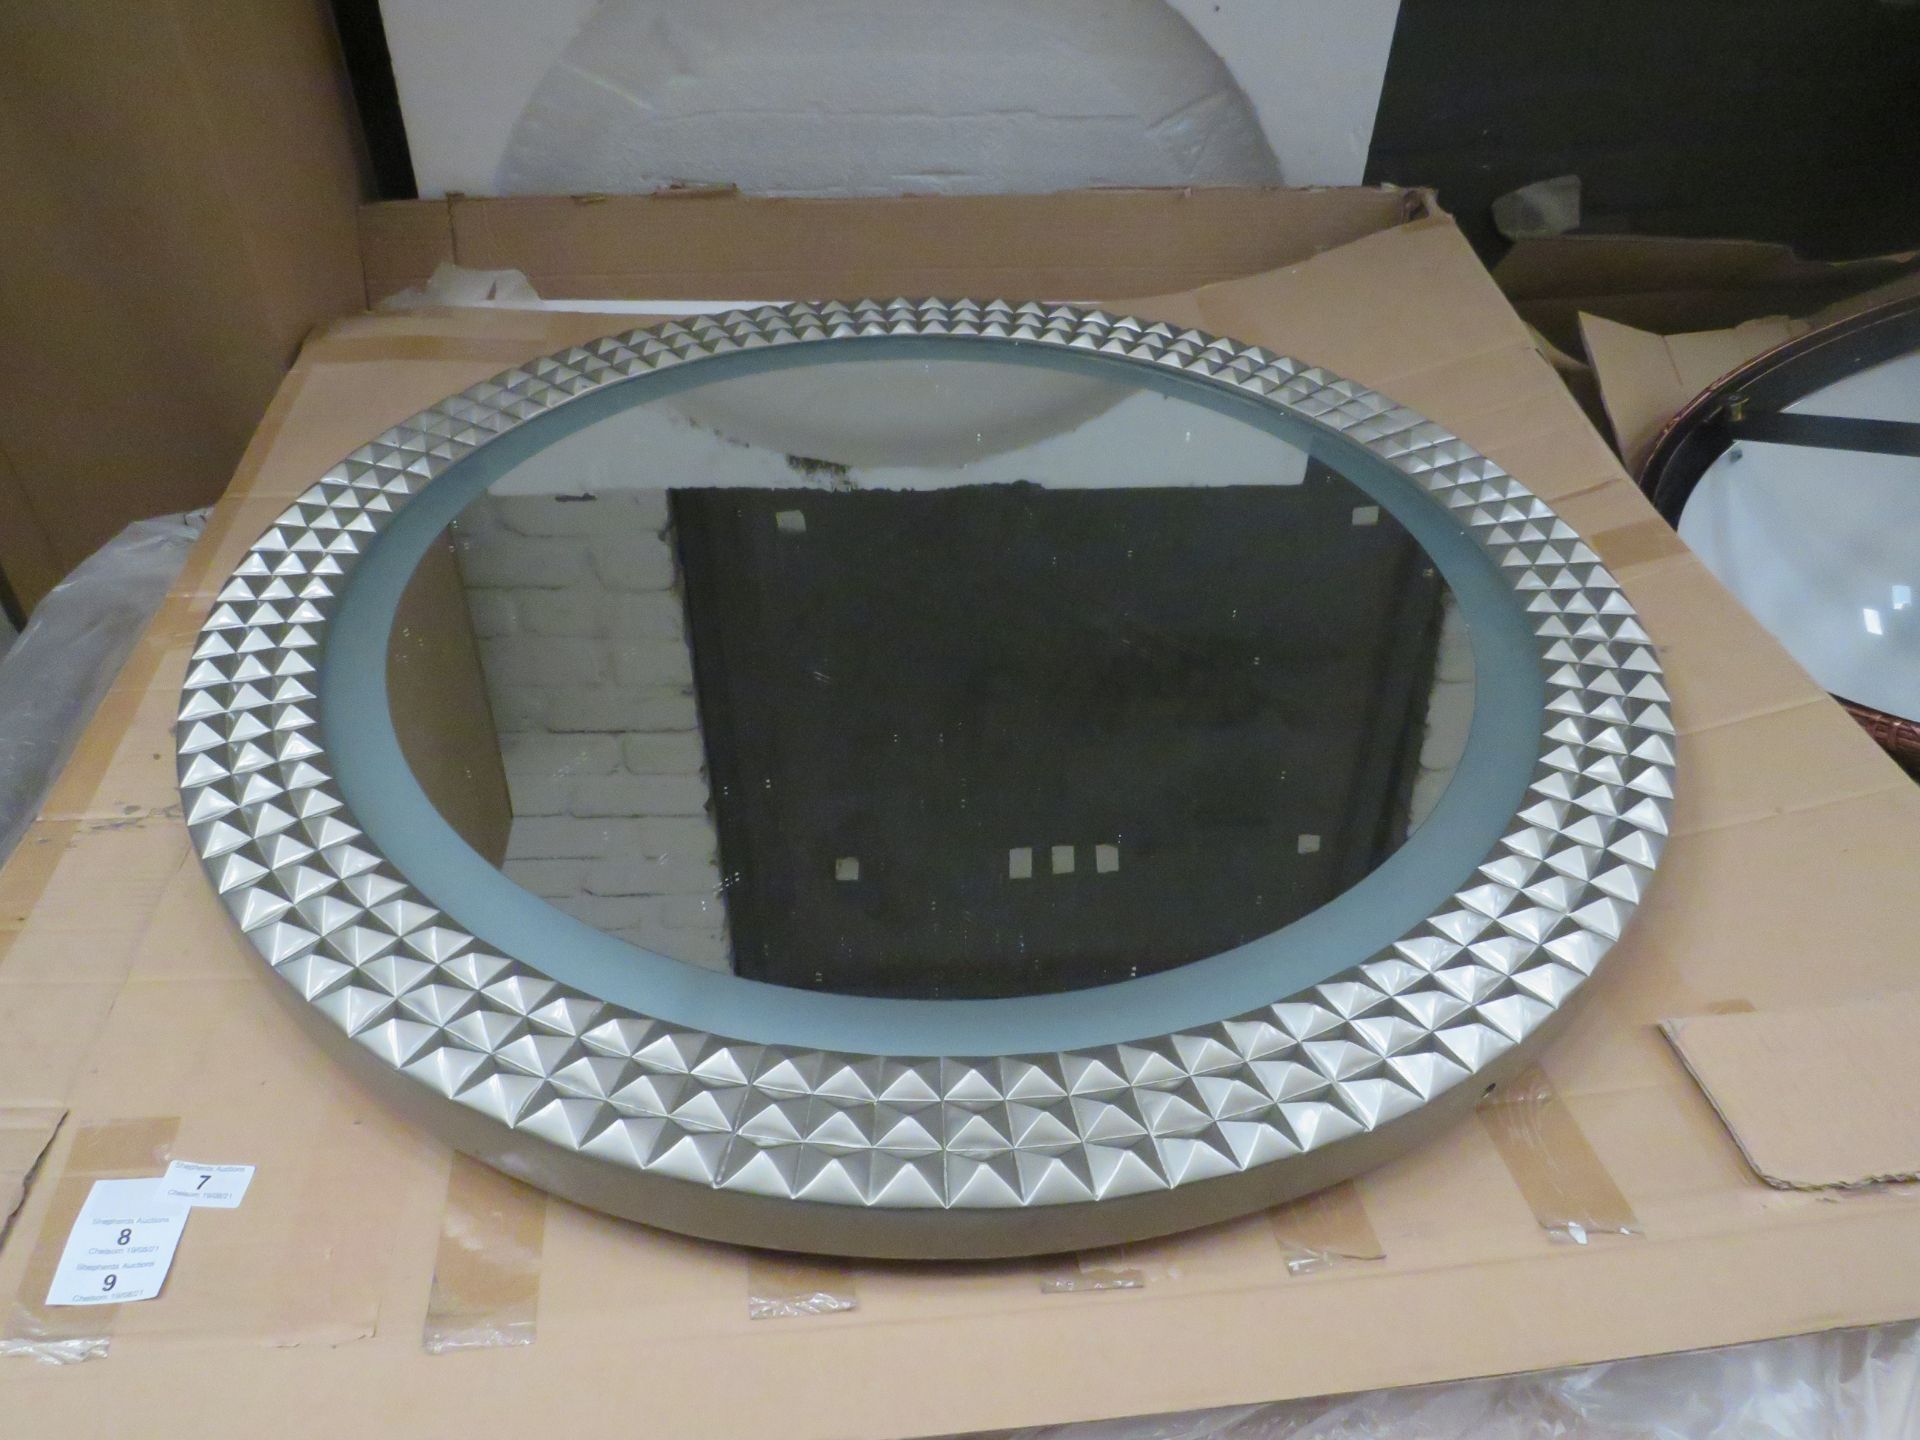 Chelsom - Large LED Mirror Textured Edge Design - Diamenter 930mm - Good Condition & Boxed.